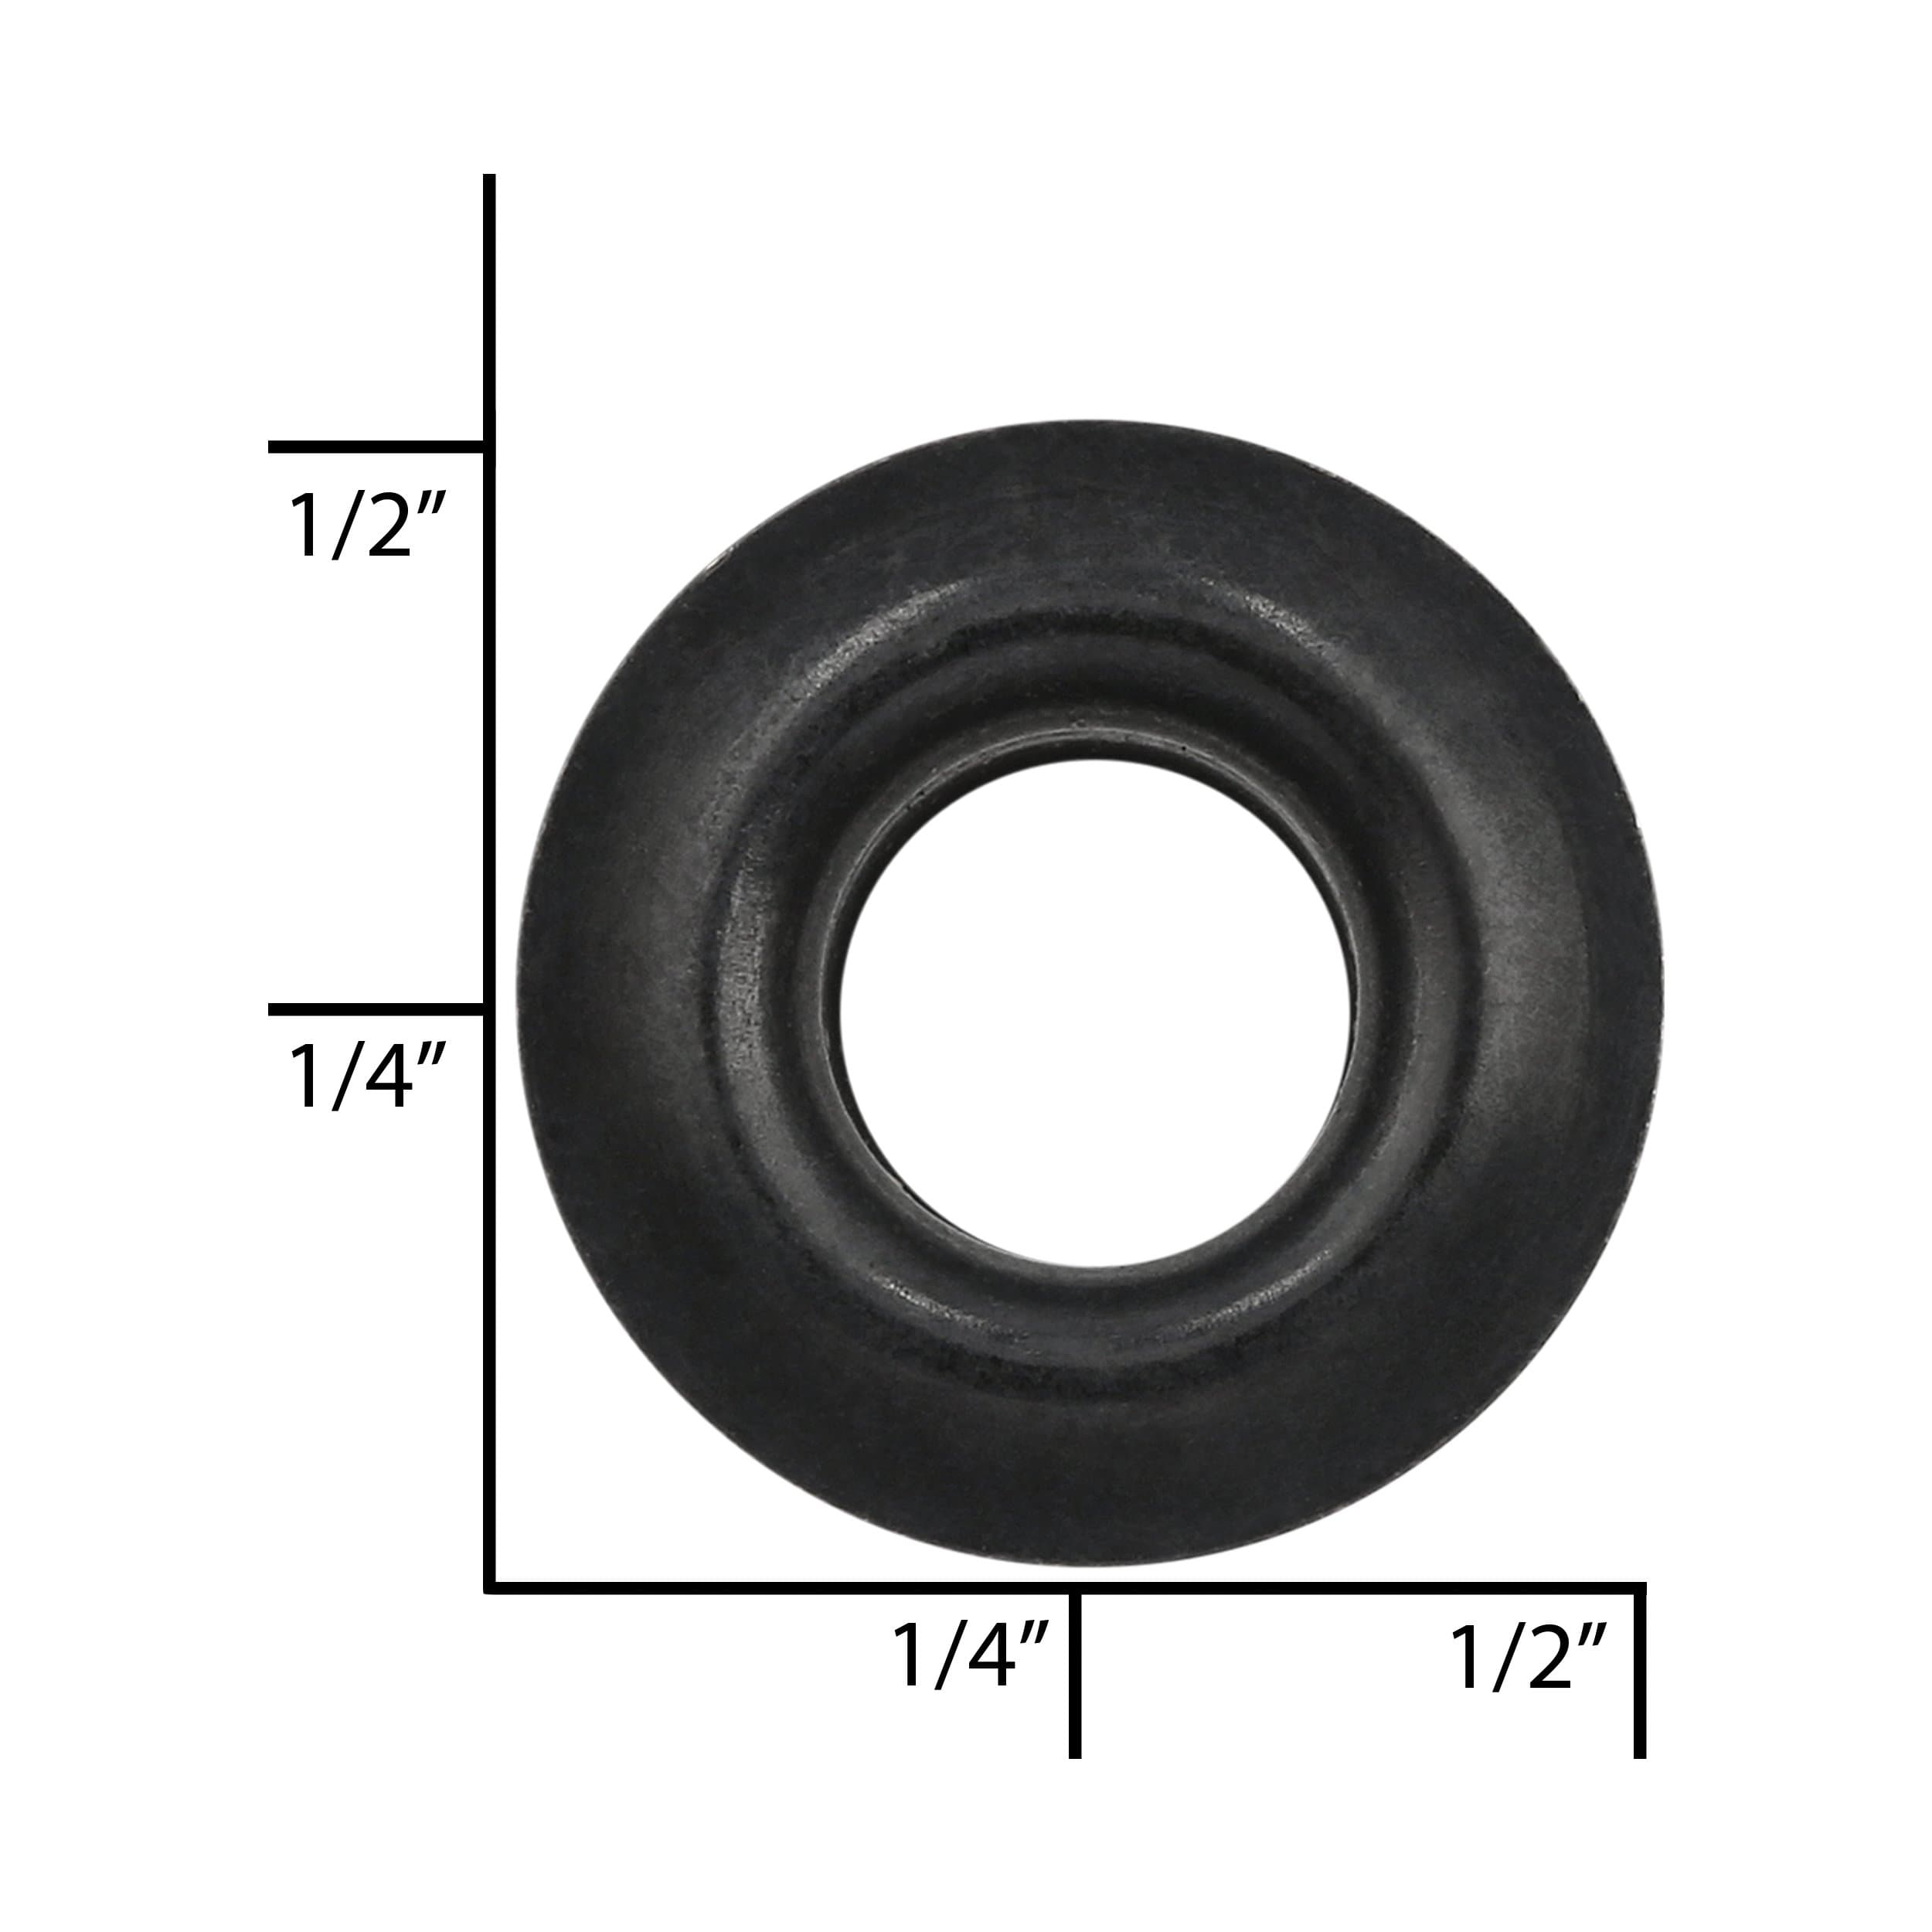 Ohio Travel Bag Fasteners #0 Black, Gromet with Washer, Solid Brass - 12 pk, #GROM-0-BLK GROM-0-BLK